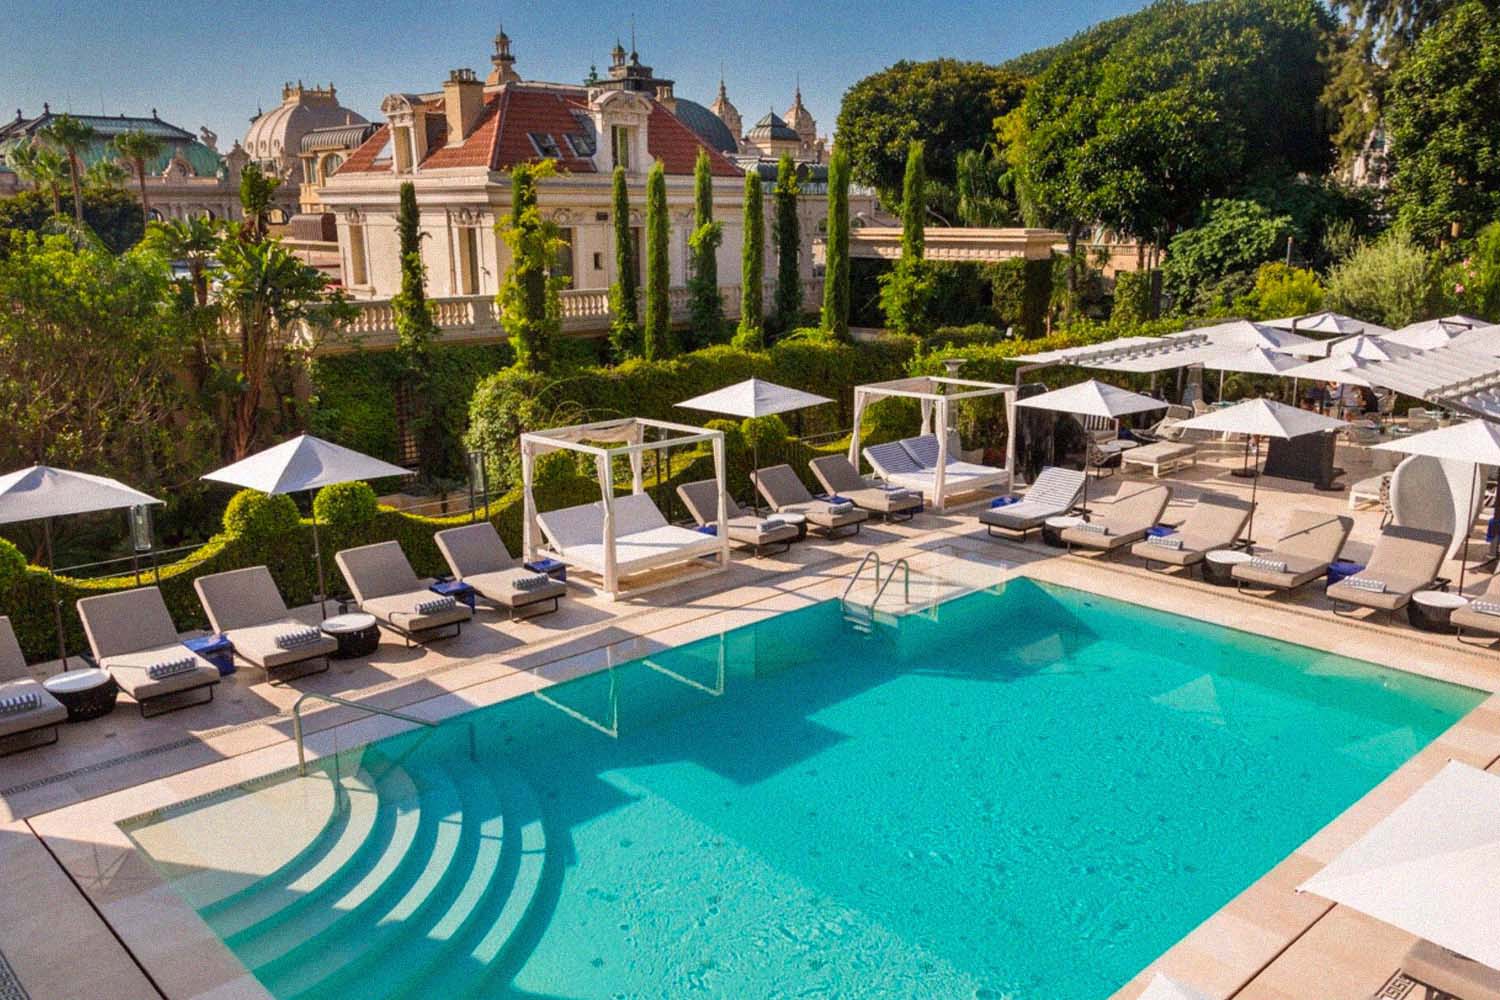 This Luxury Has of the Most Expensive Pools in the World - InsideHook